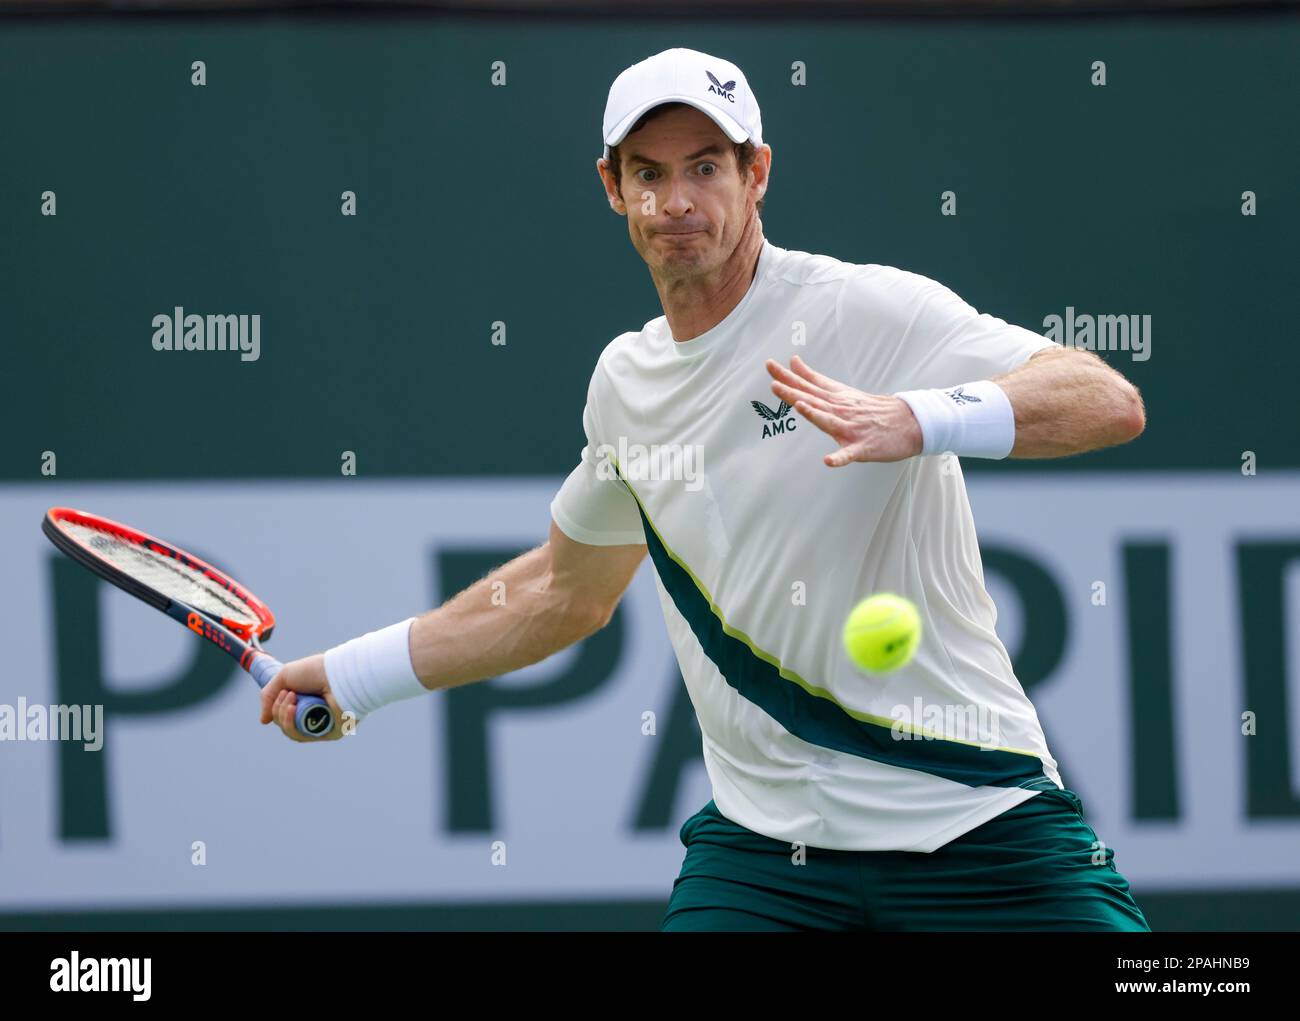 March 11, 2023 Andy Murray of Great Britain returns a shot against Radu  Albot of Moldova during the 2023 BNP Paribas Open at Indian Wells Tennis  Garden in Indian Wells, California. Mandatory